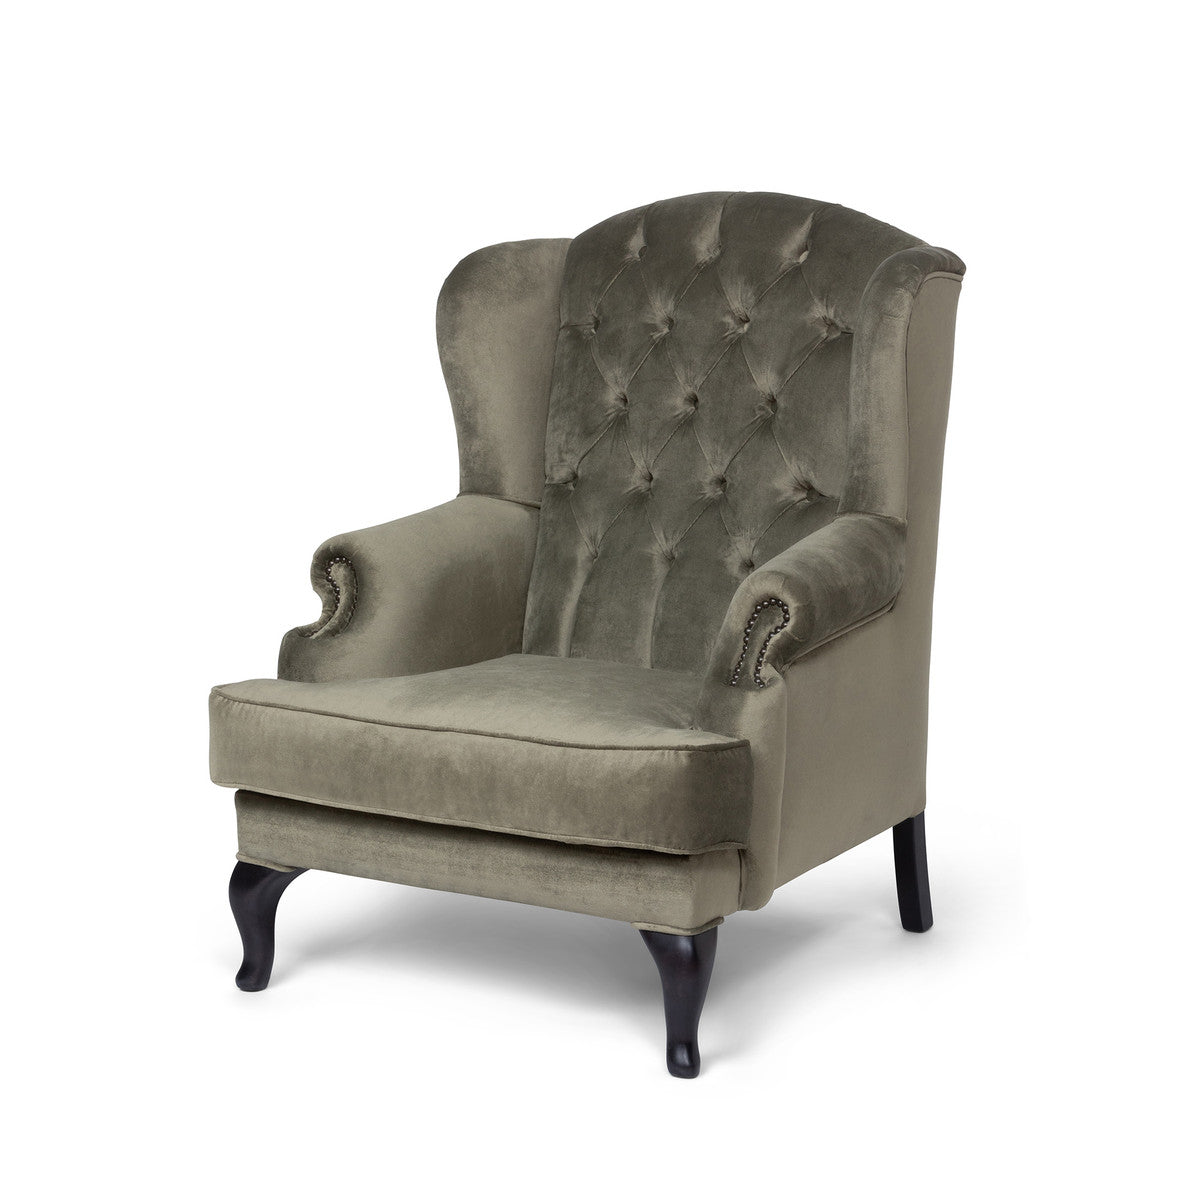 Park Hill - Delancy Tufted Wing Chair